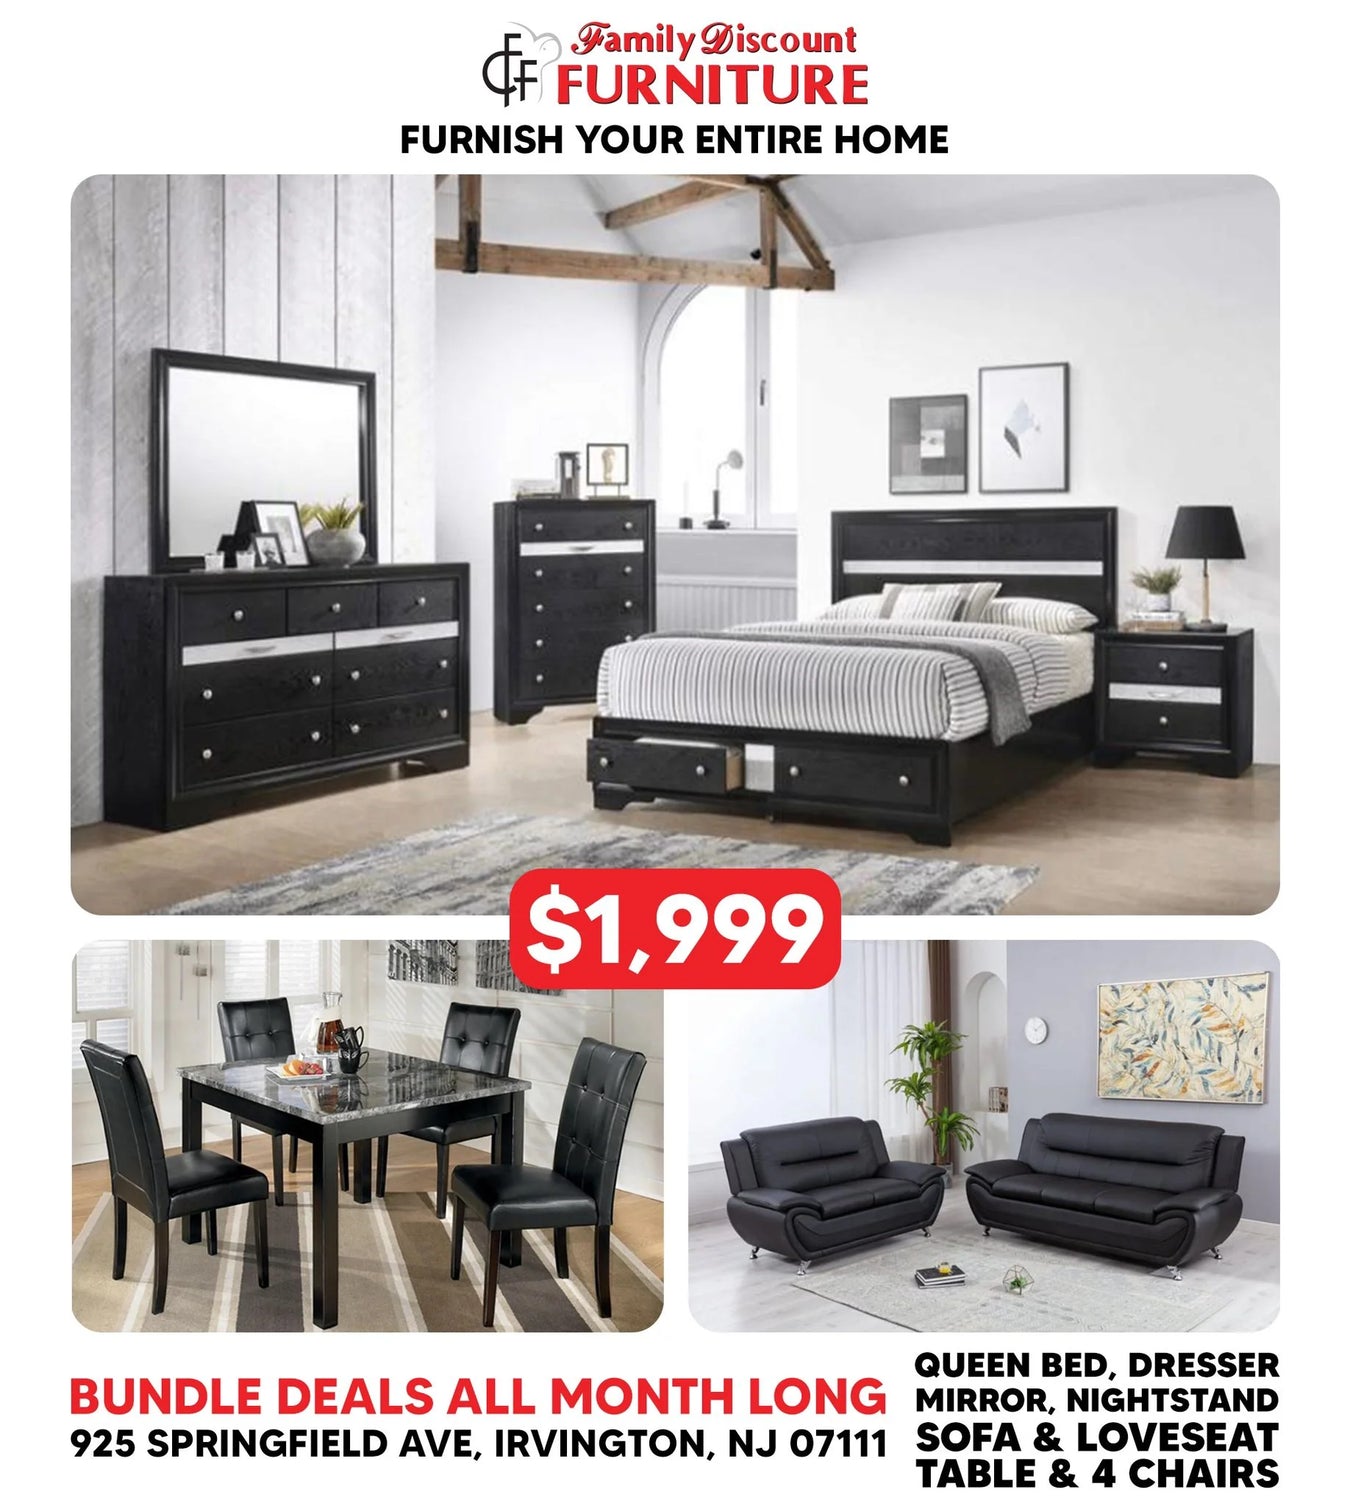 Furnish House Packages, Limited Products $1,999